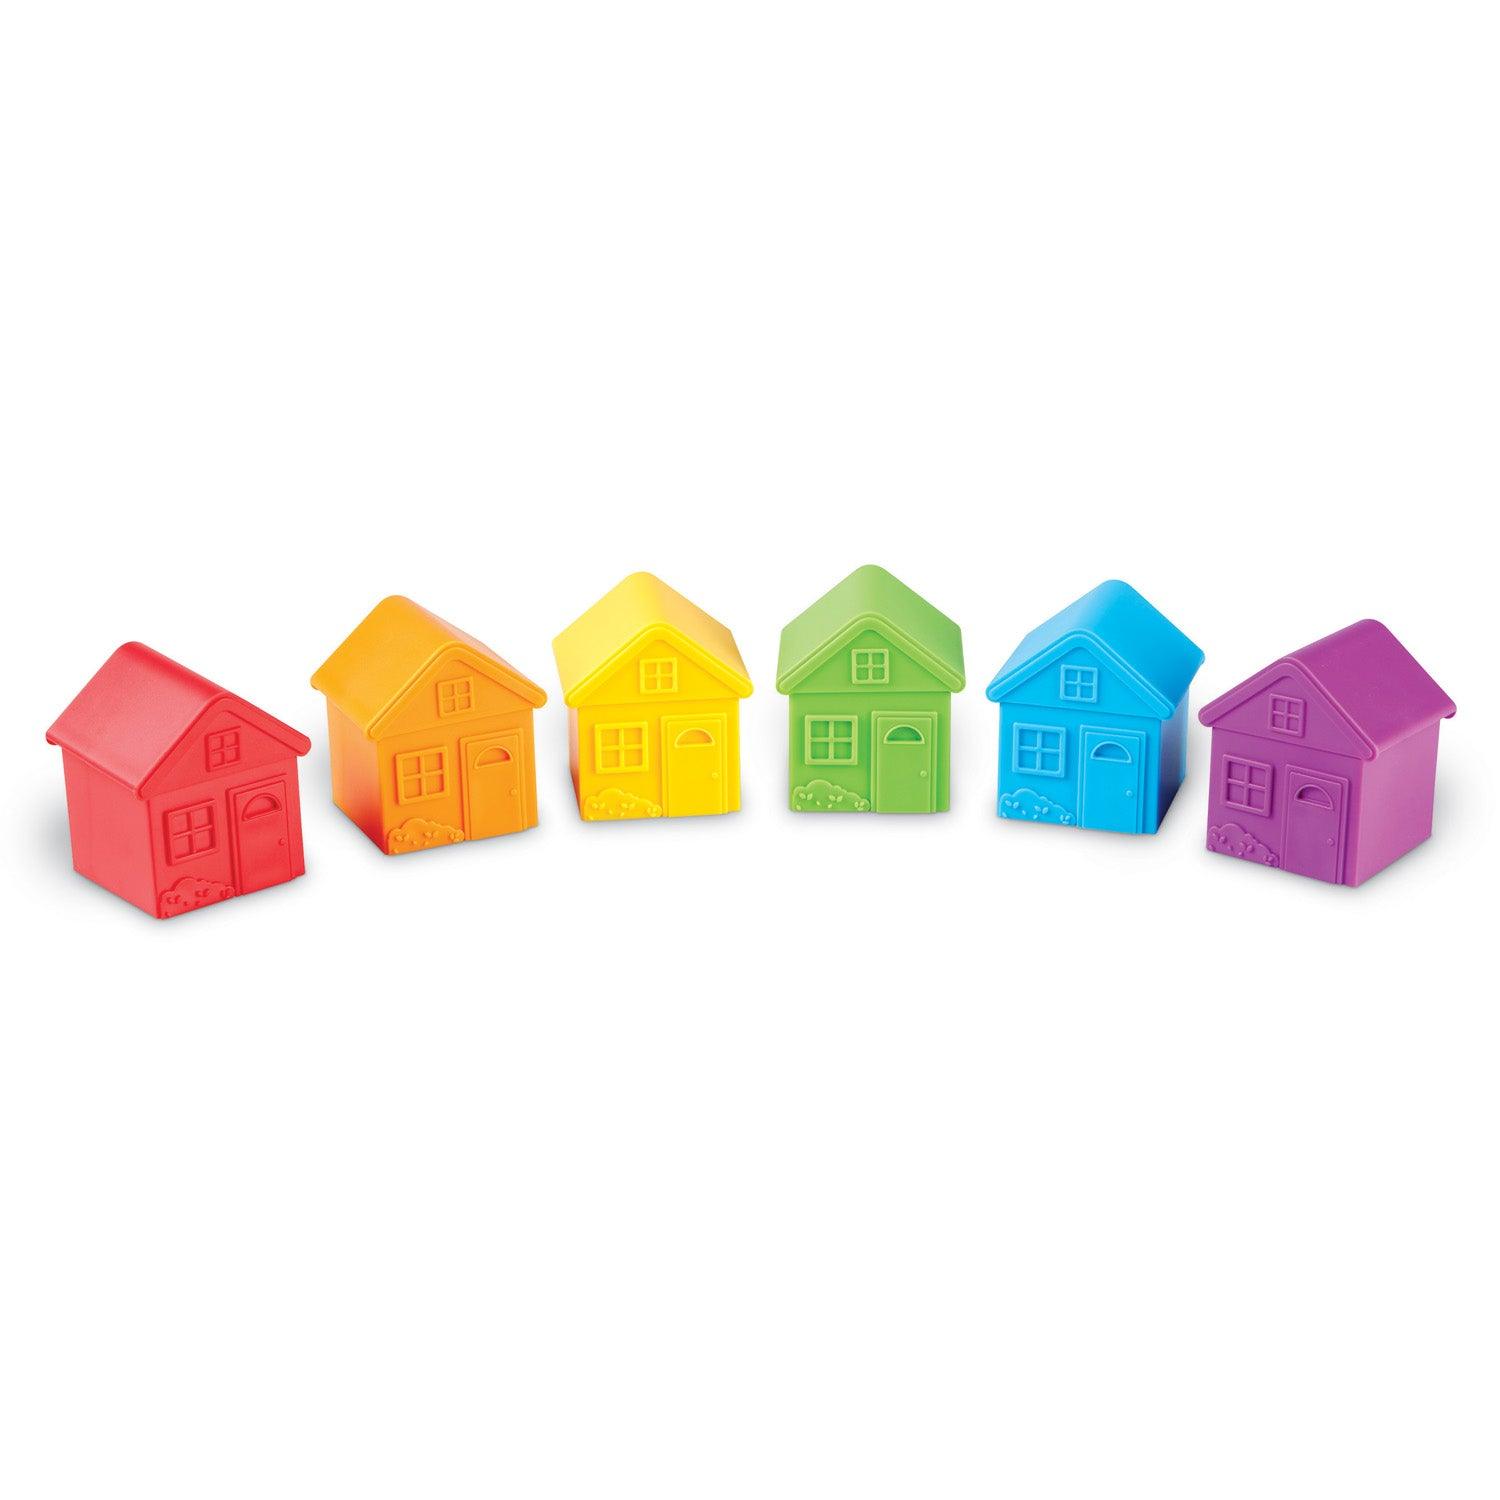 All About Me Sort & Match Houses, Set of 6 - Loomini